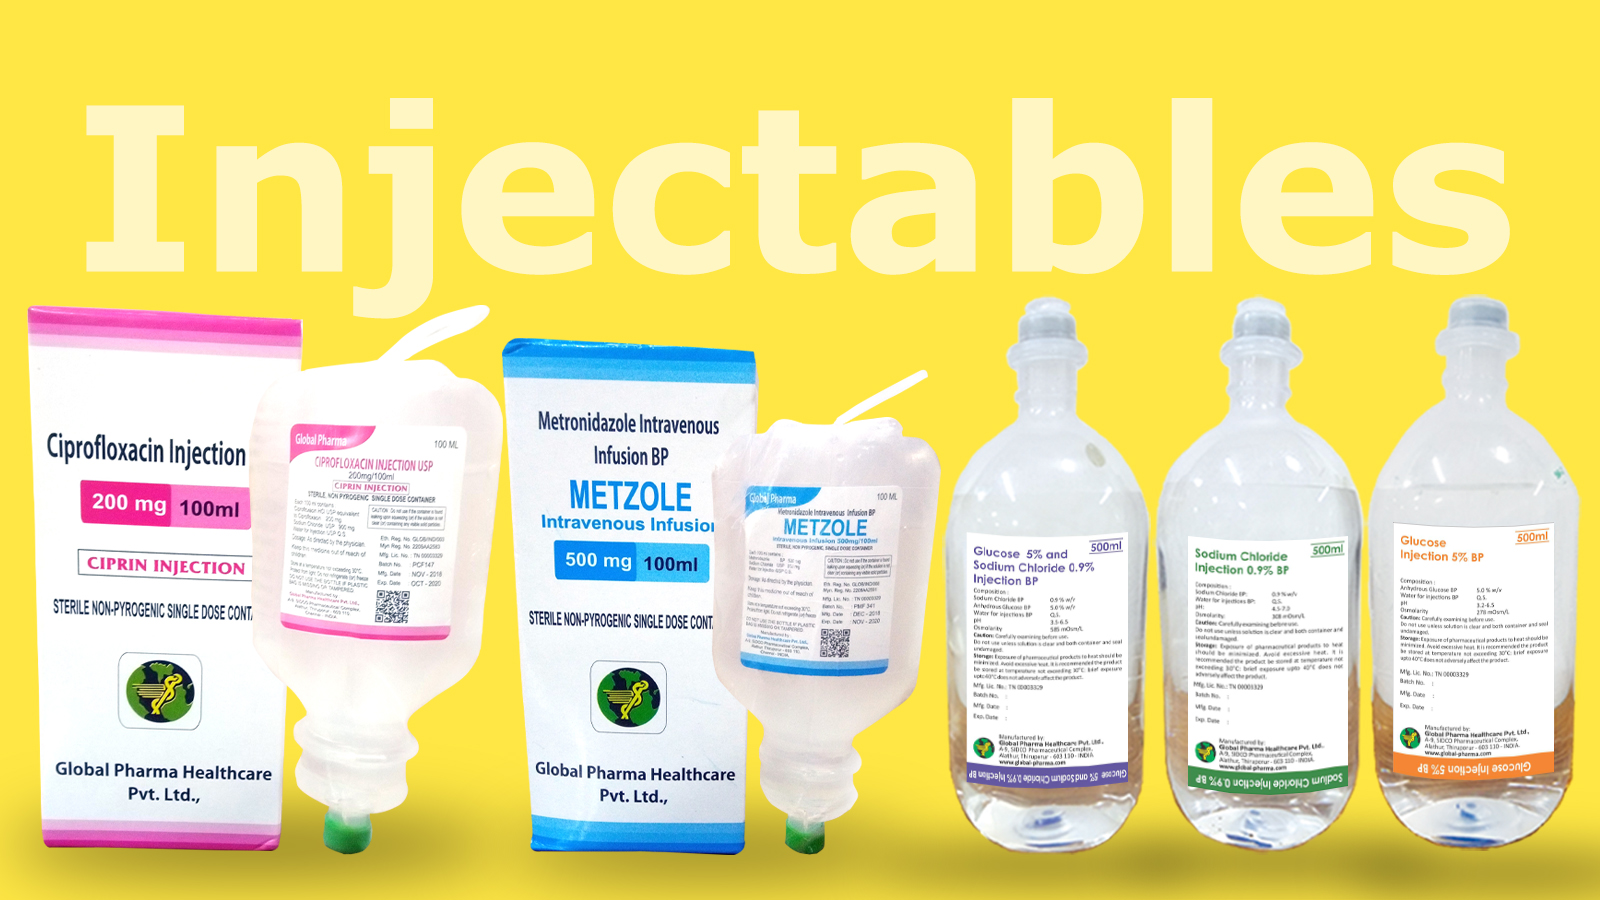 Sterile Products